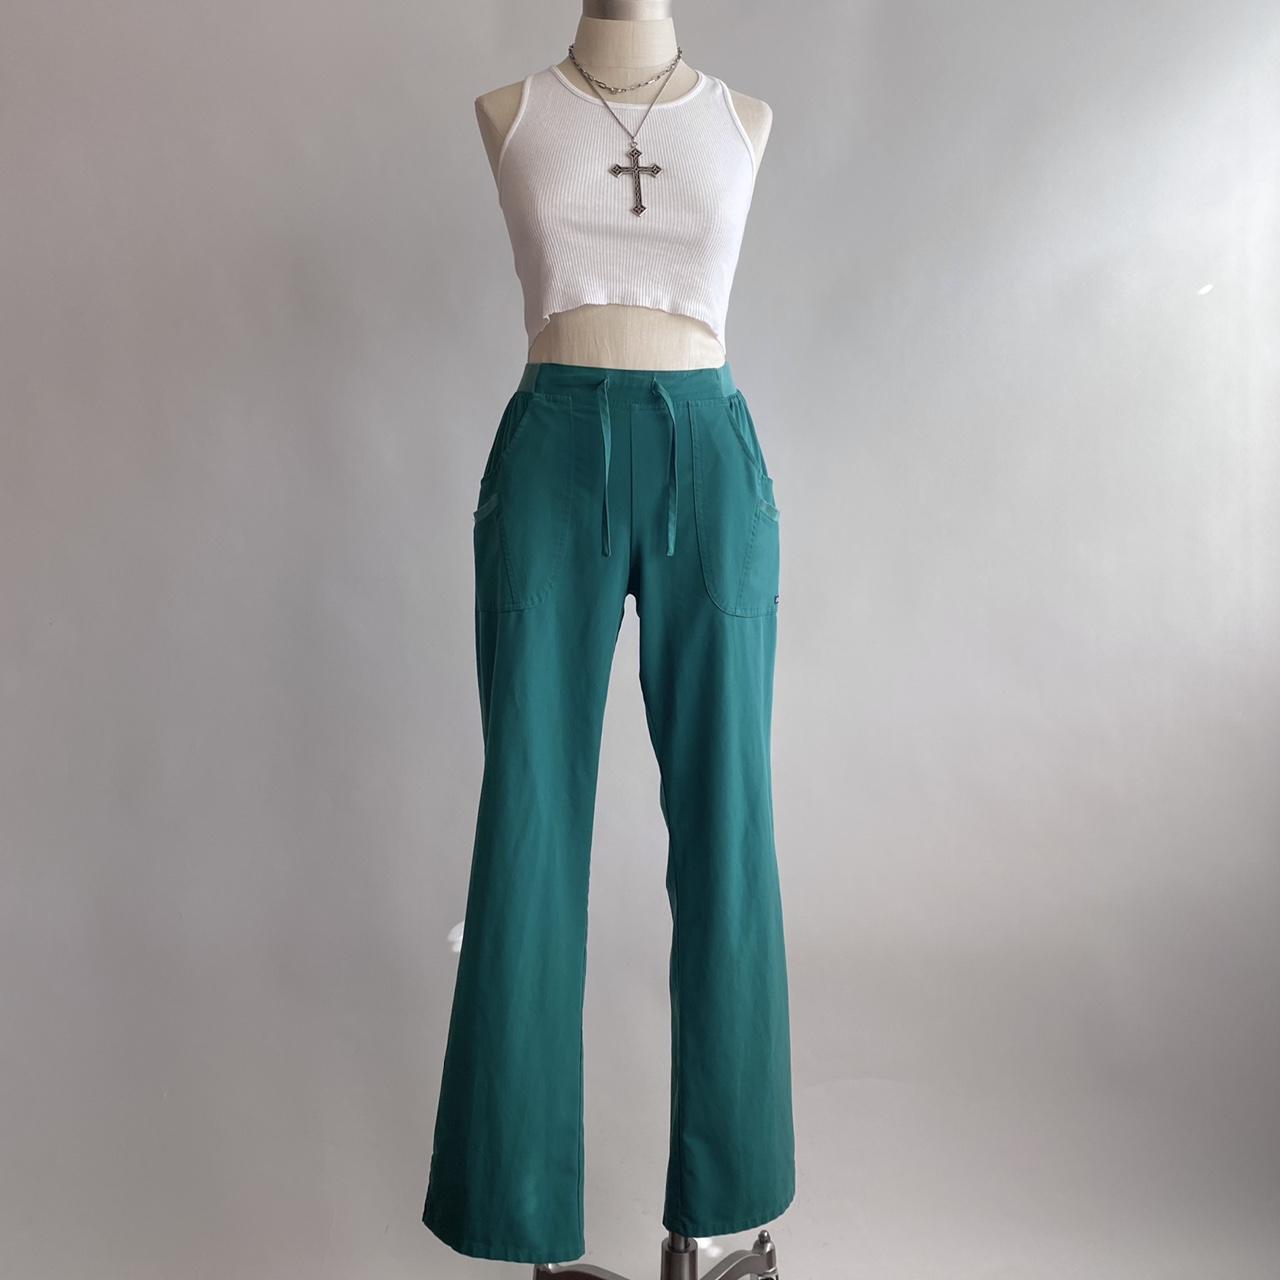 Product Image 1 - Forest Green Pants 

Lightweight forest